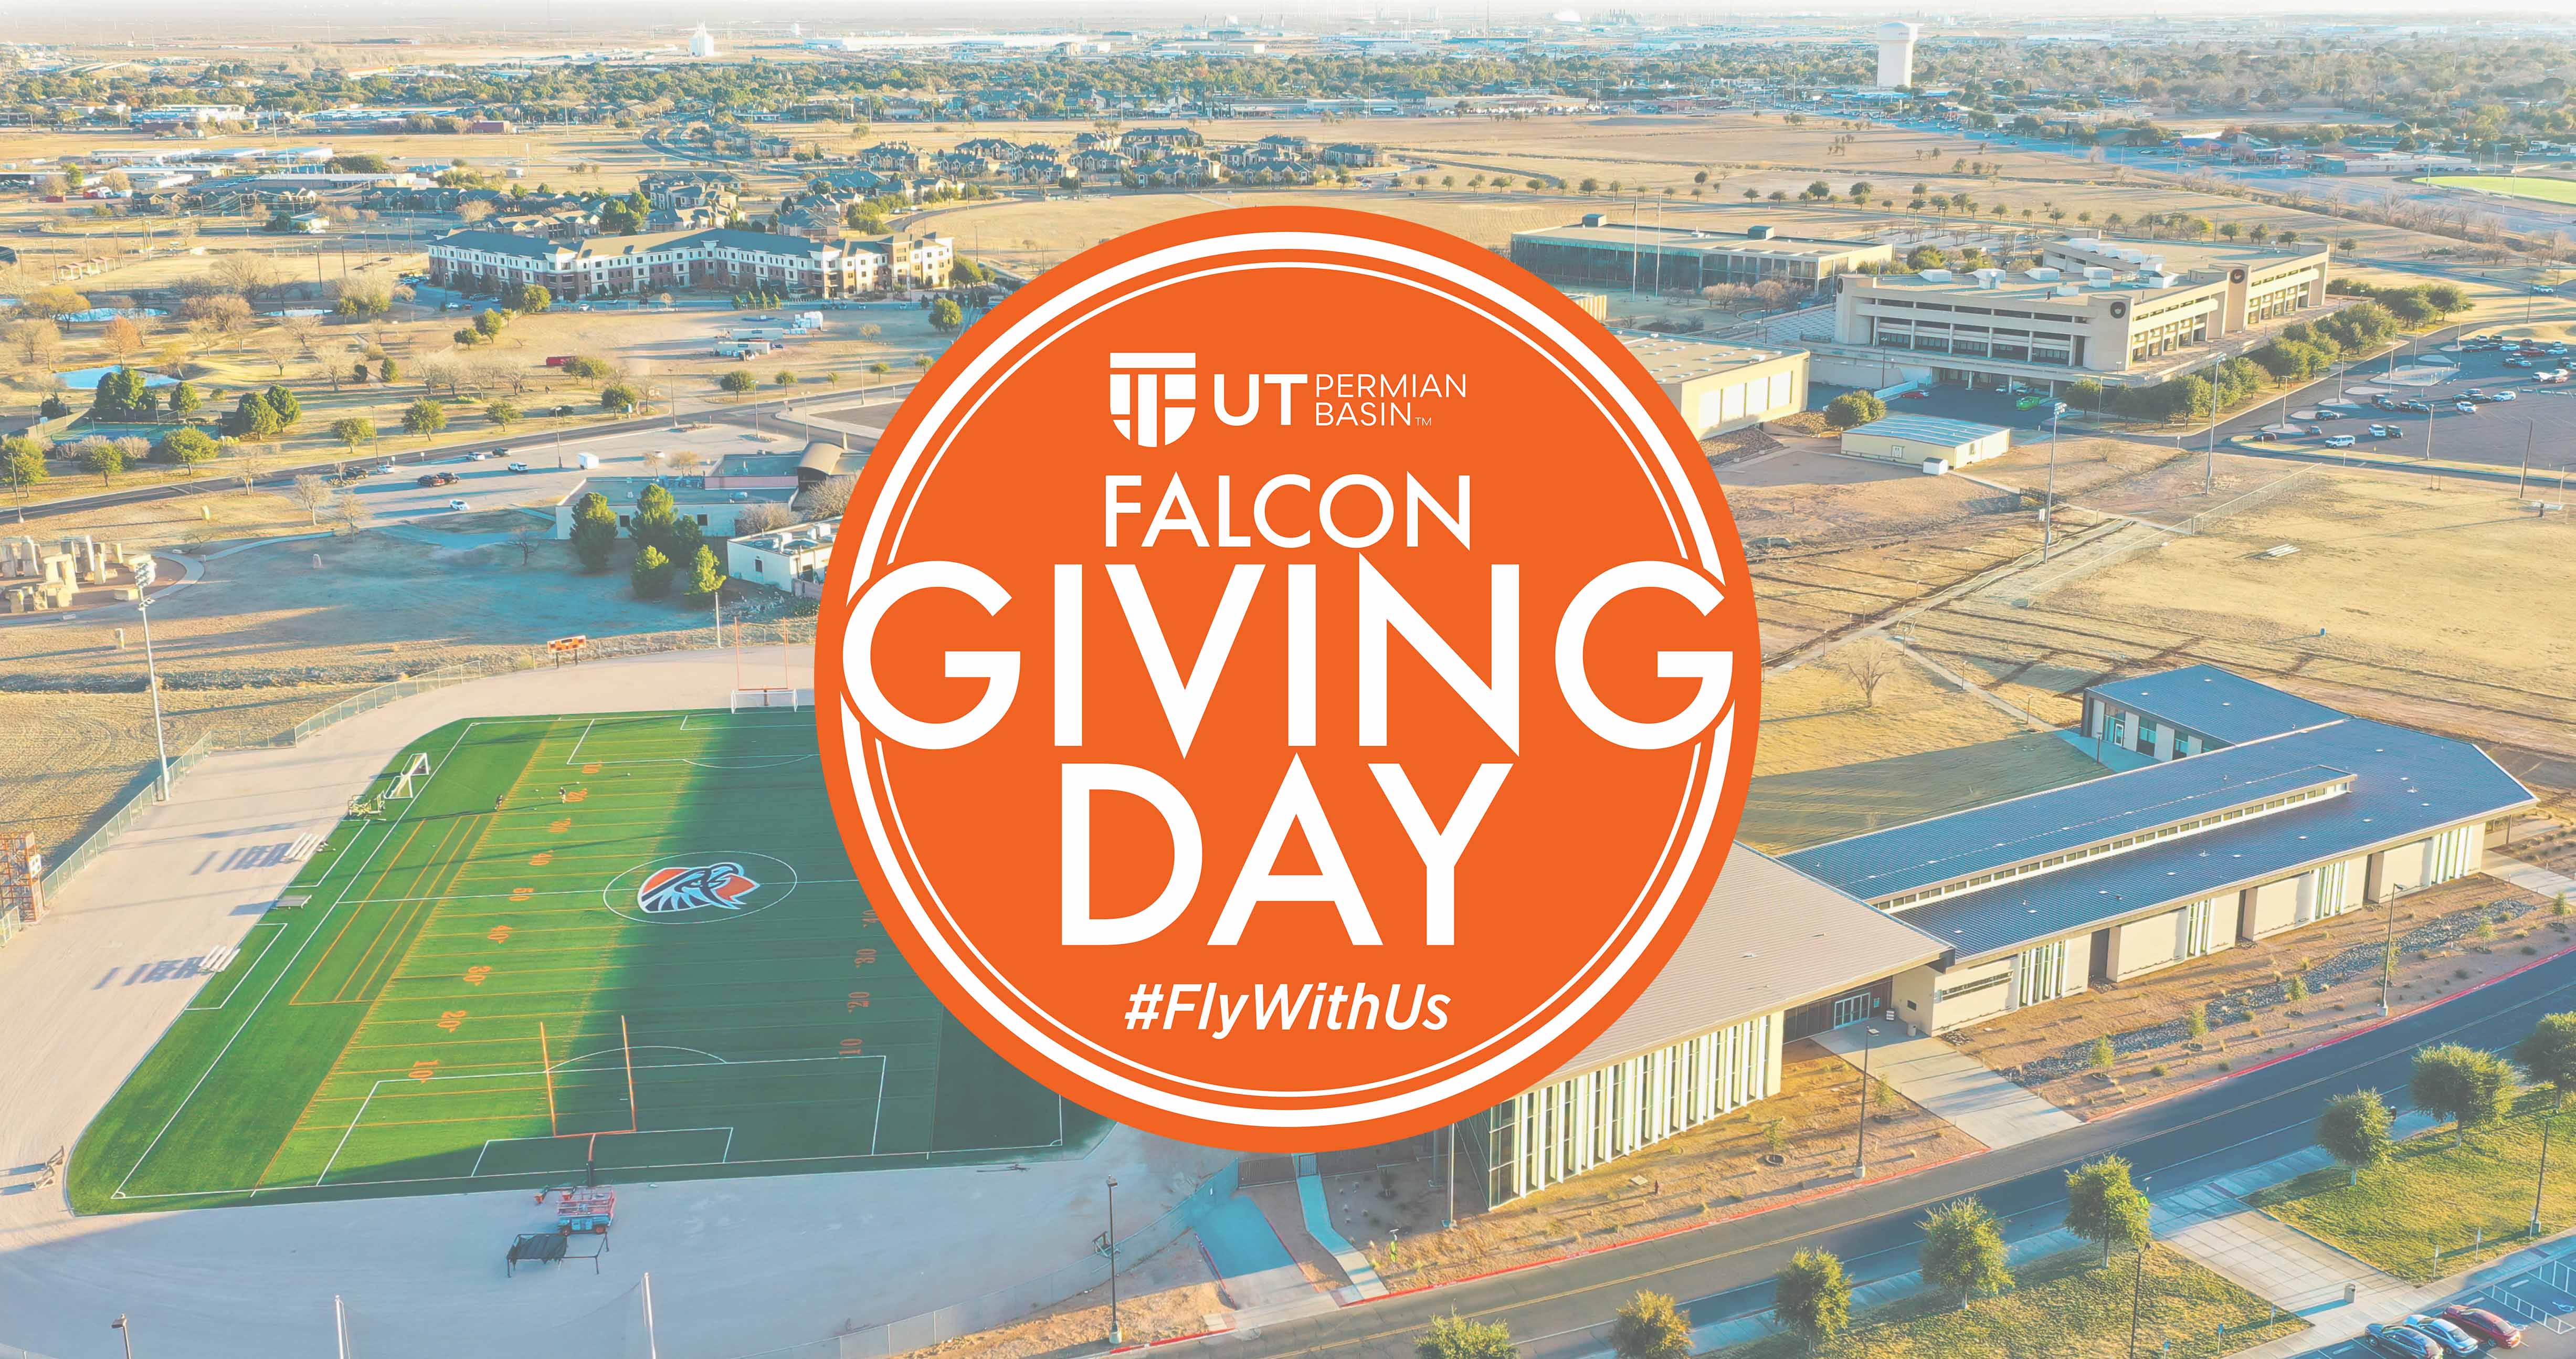 Falcon Giving Day Image